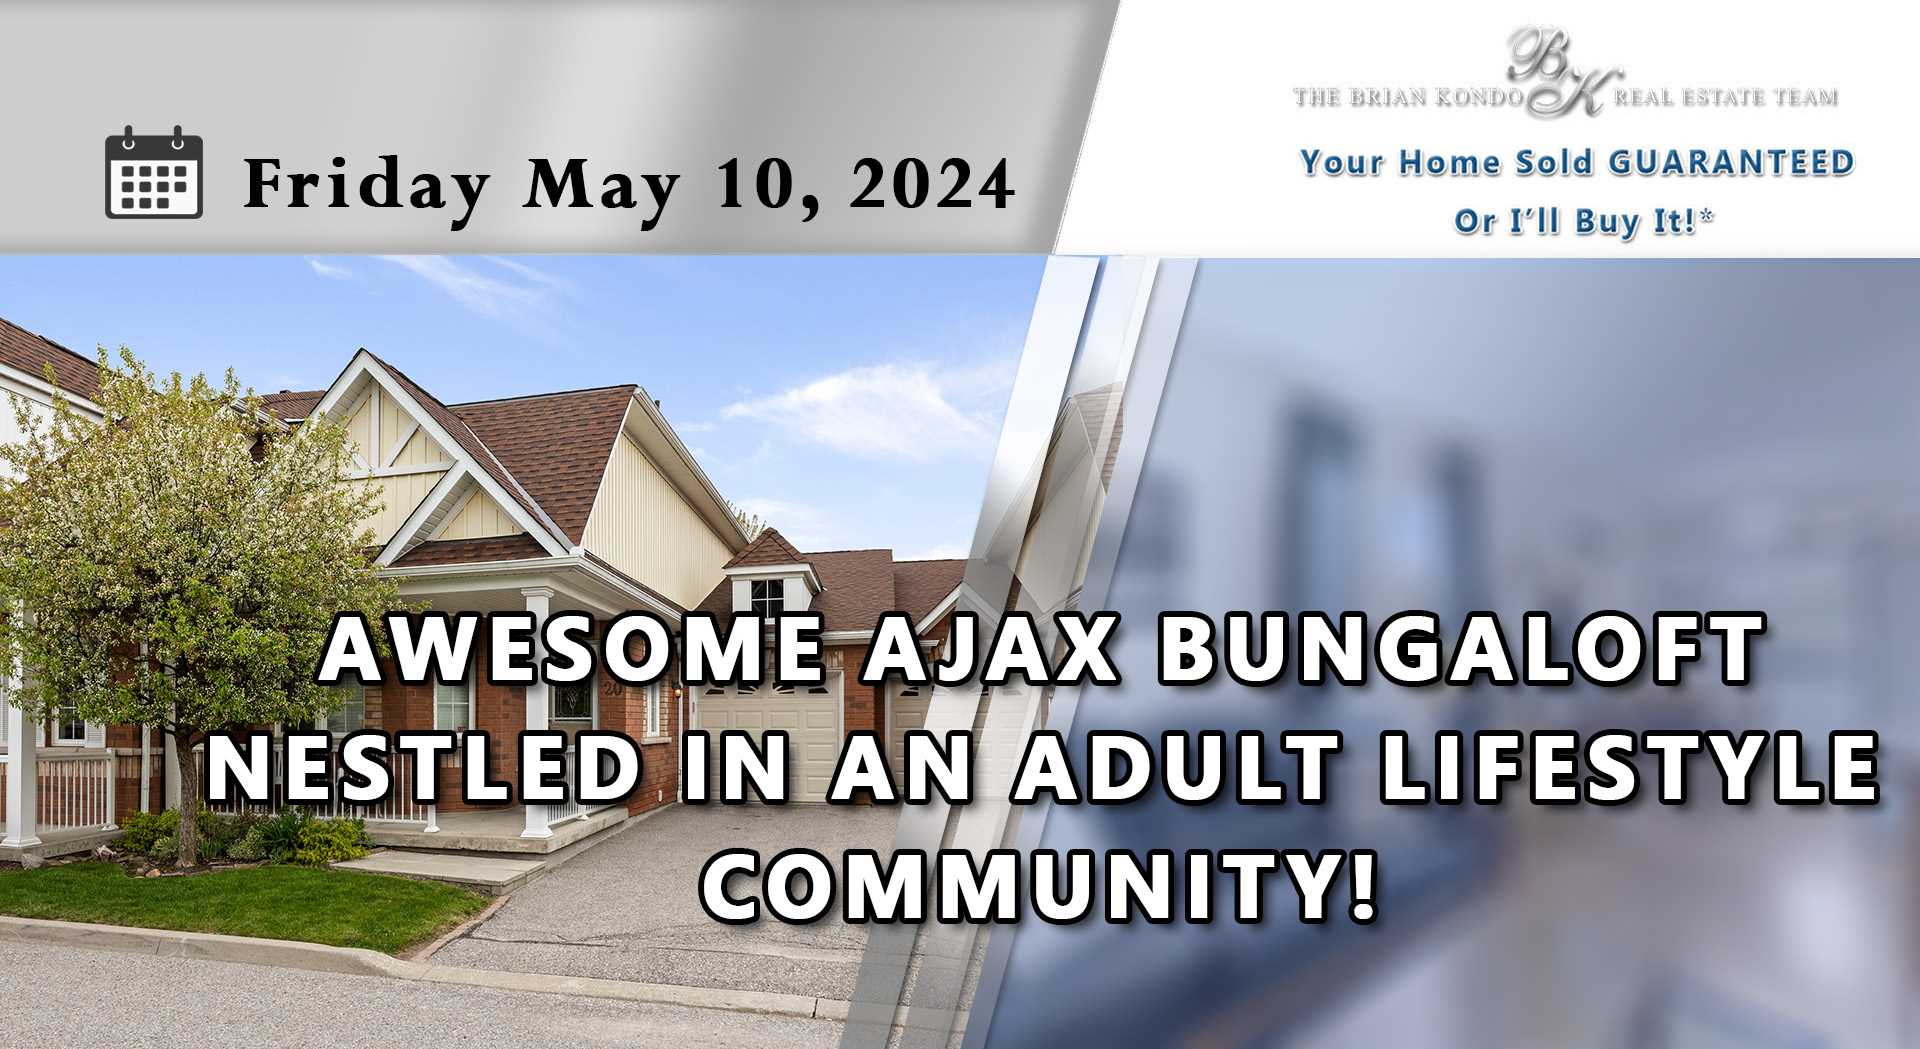 JUST LISTED: AWESOME AJAX BUNGALOFT NESTLED IN AN ADULT LIFESTYLE COMMUNITY!